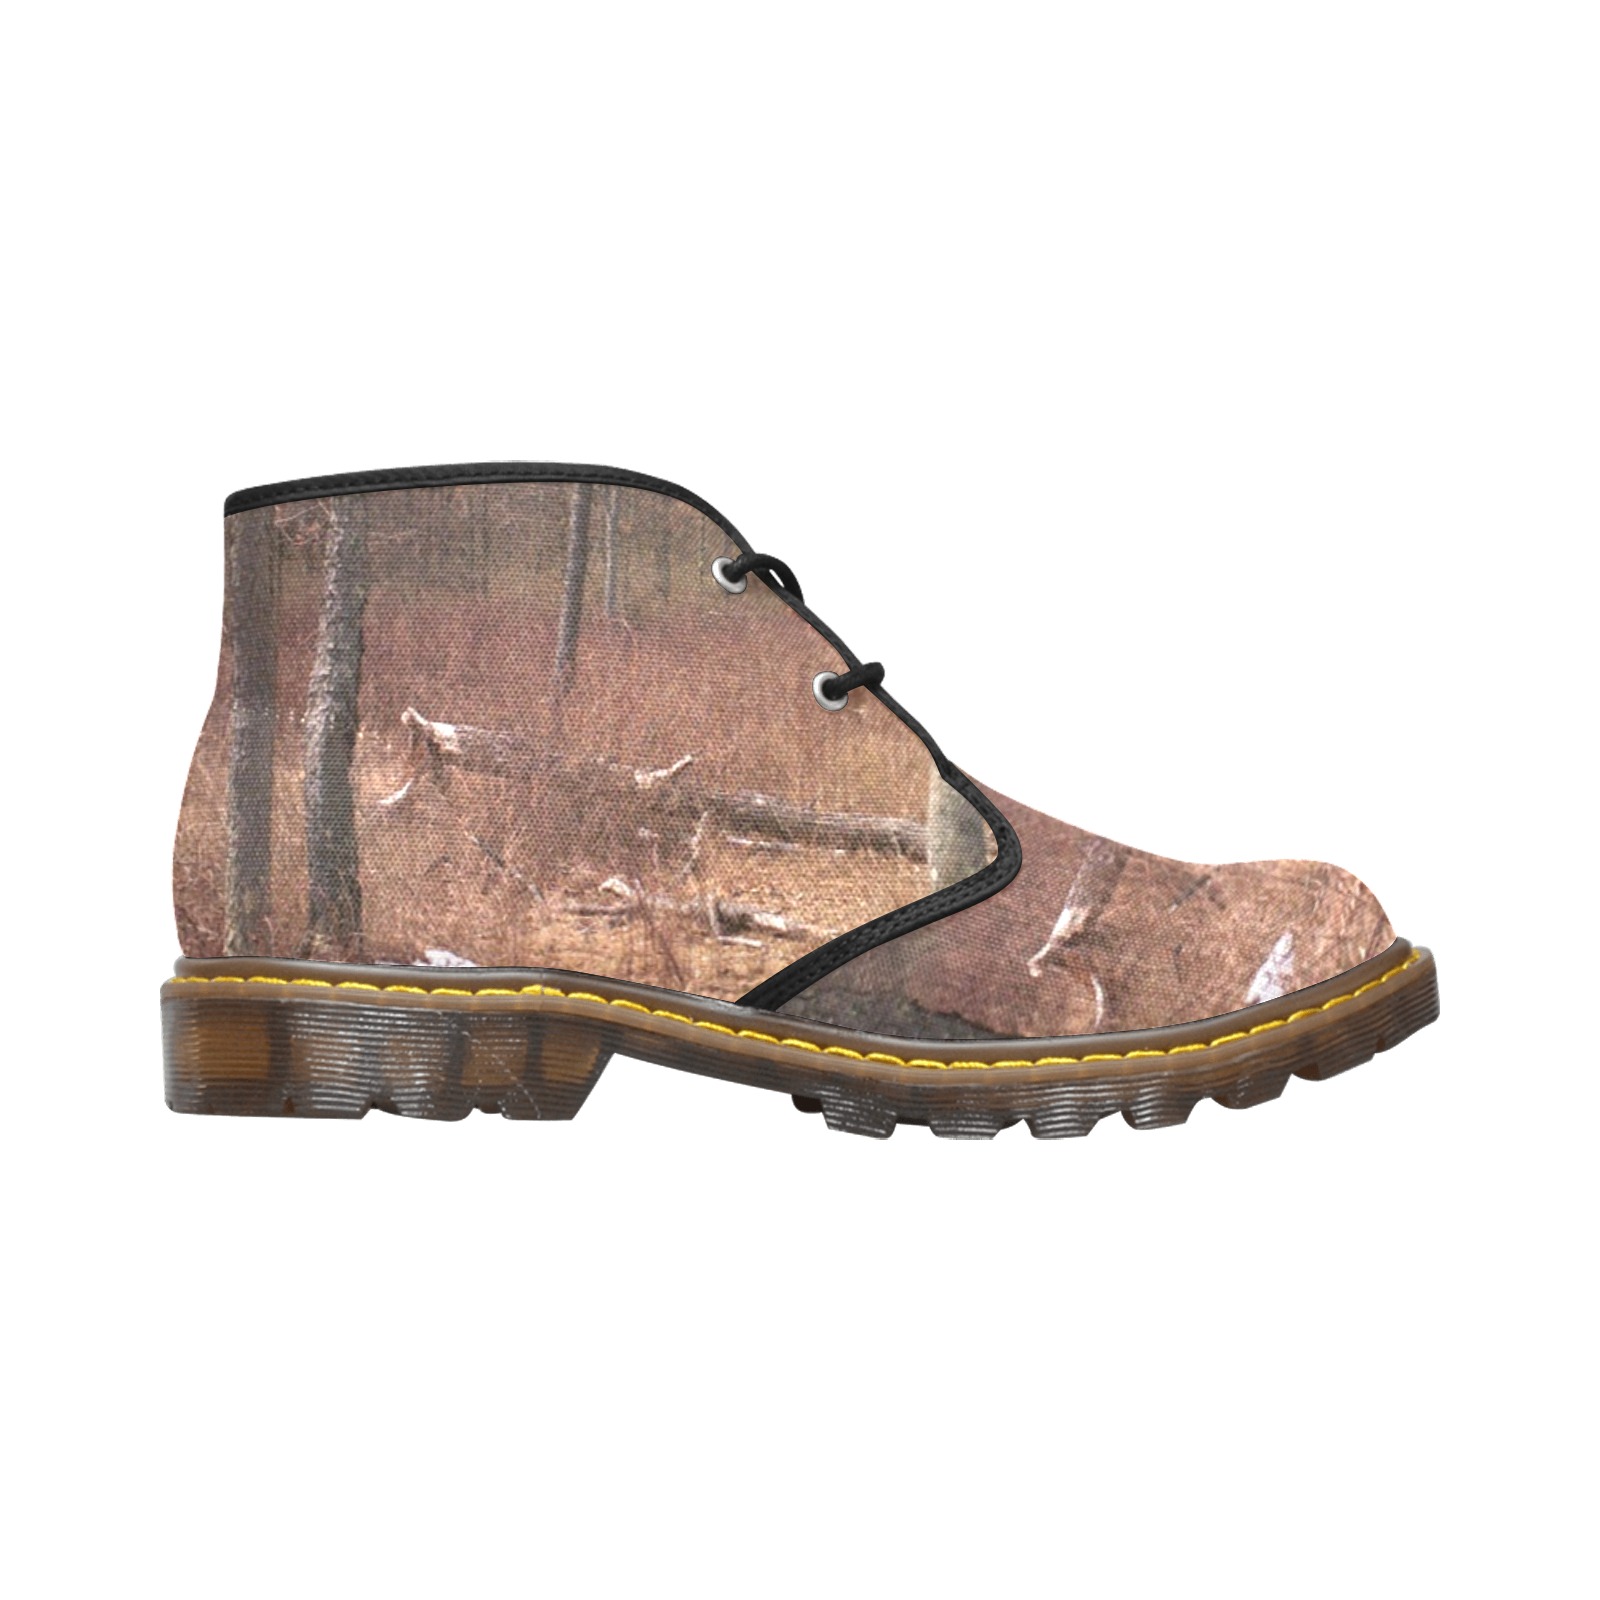 Falling tree in the woods Men's Canvas Chukka Boots (Model 2402-1)